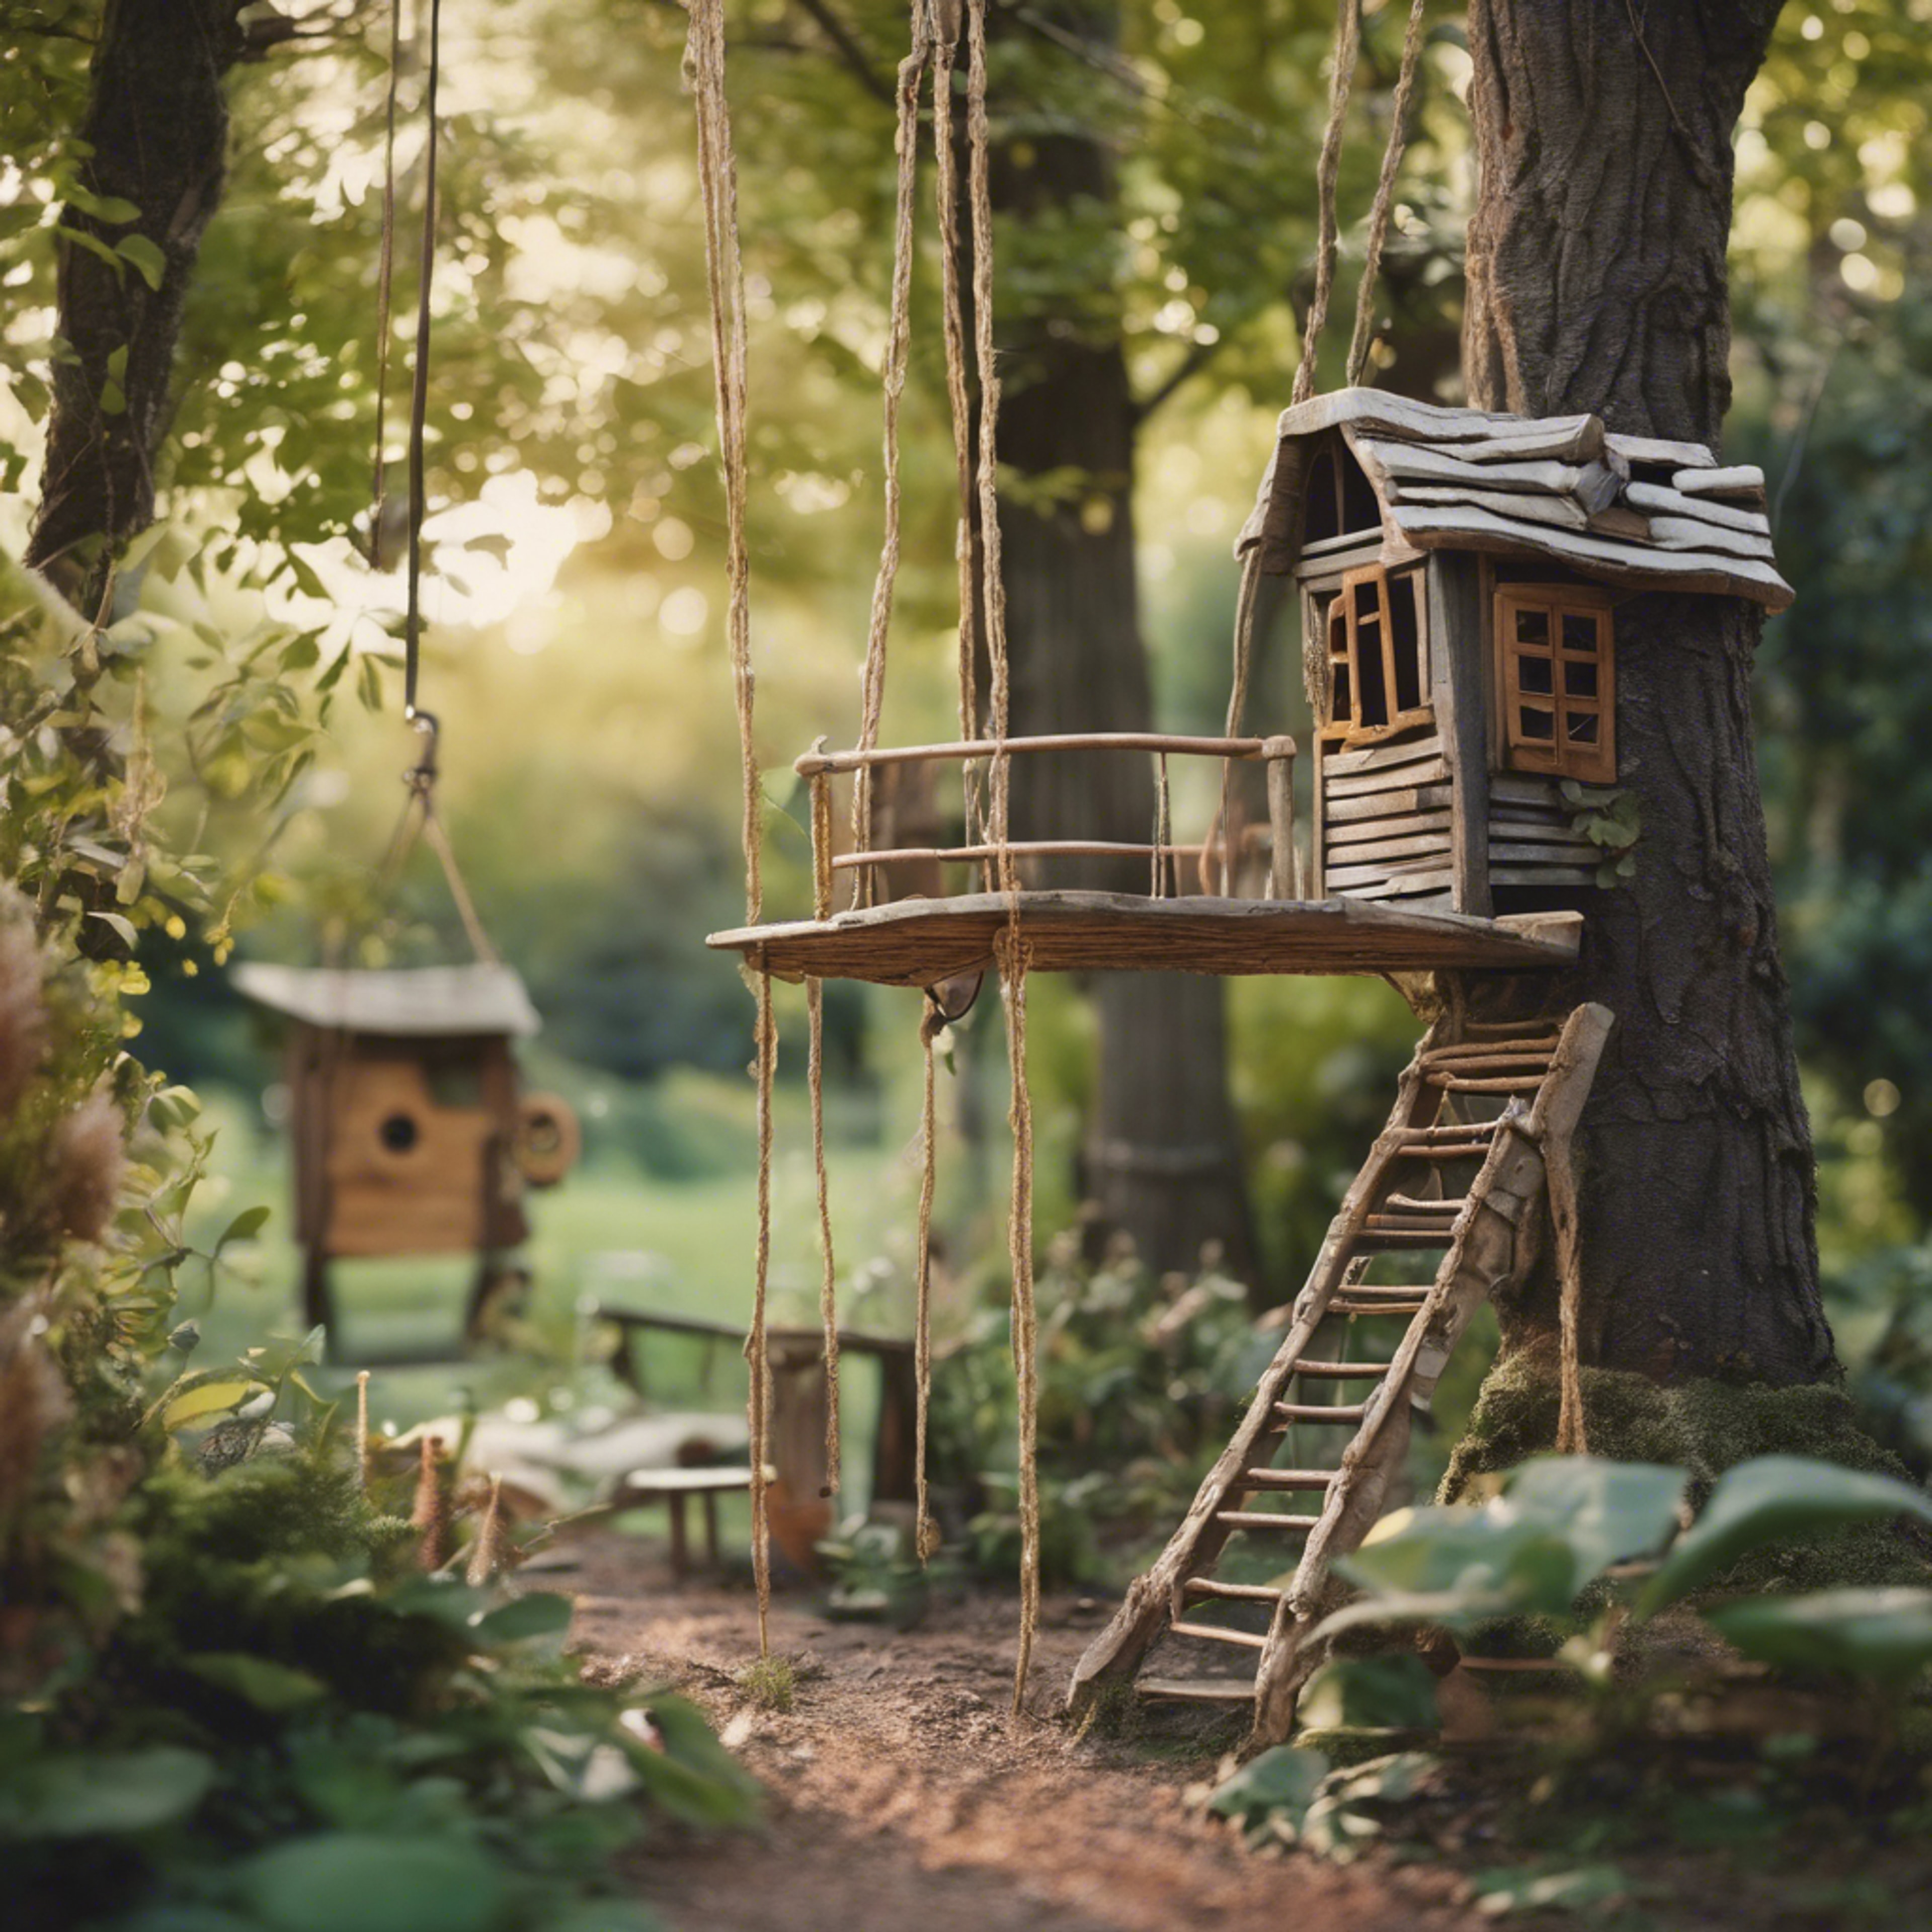 A nostalgic children’s garden filled with hidden treasures, tire swings, and treehouses built amidst towering trees. Tapeta[4077f42451f34ca69b37]